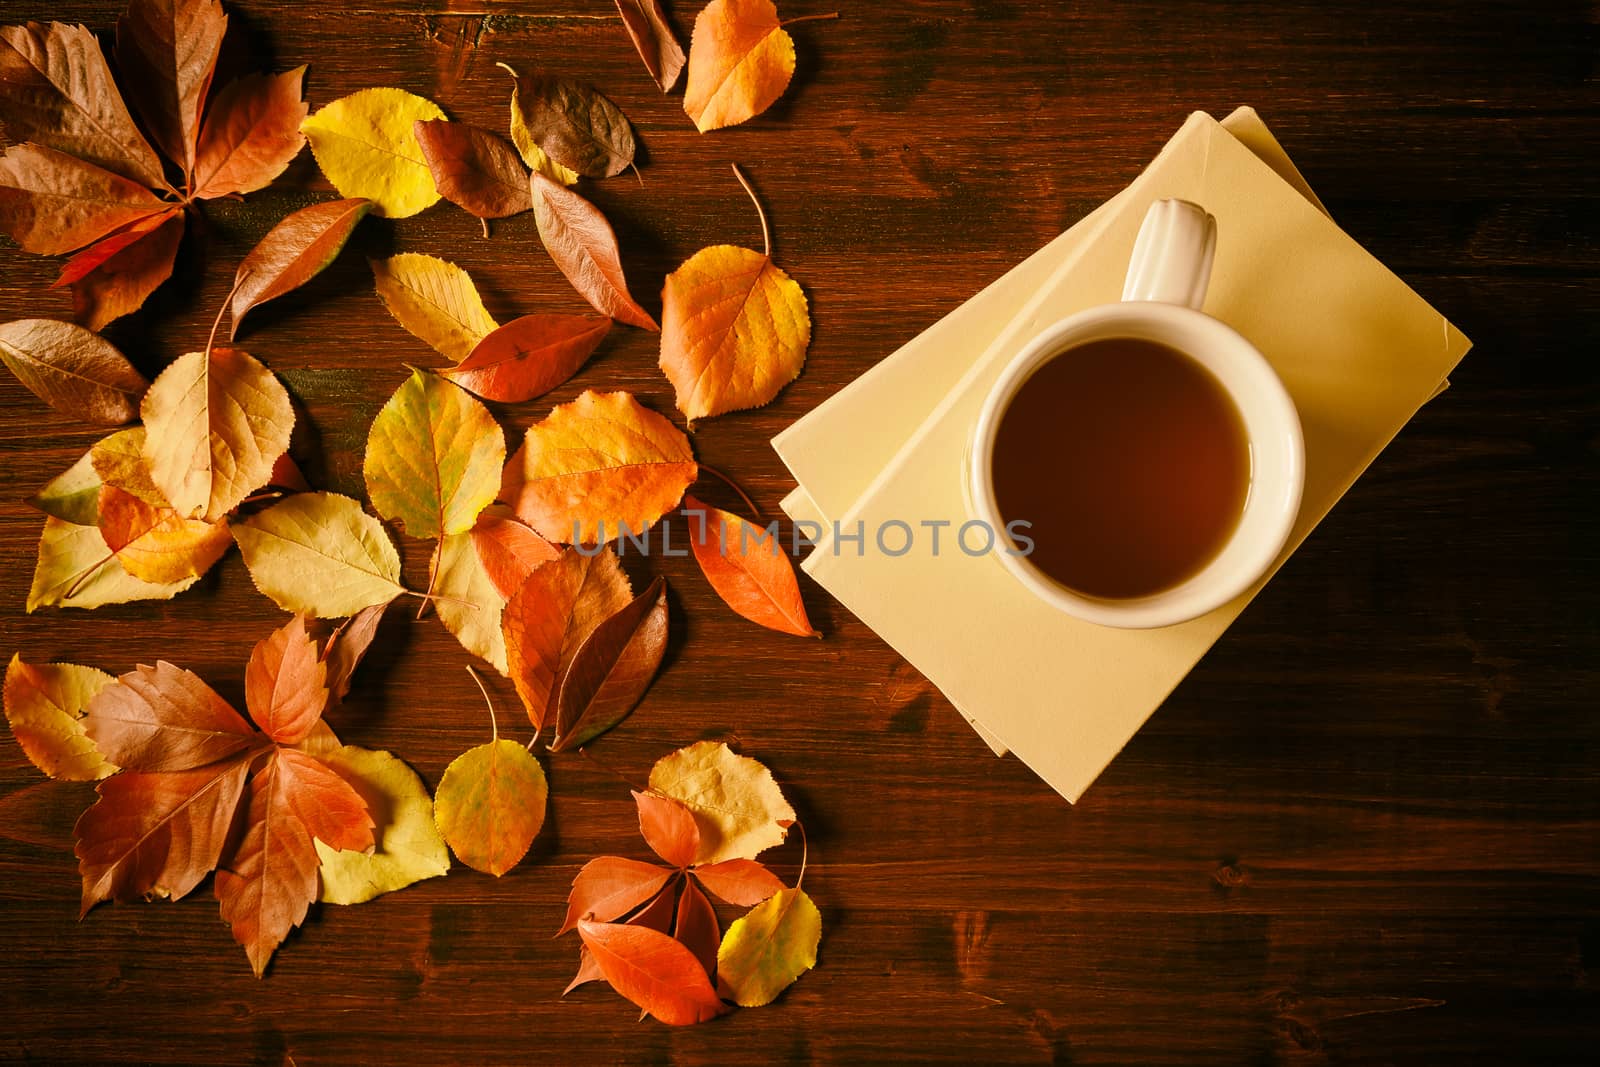 Cup of tea, books and autumnal foliage in vintage style over a table seen from above